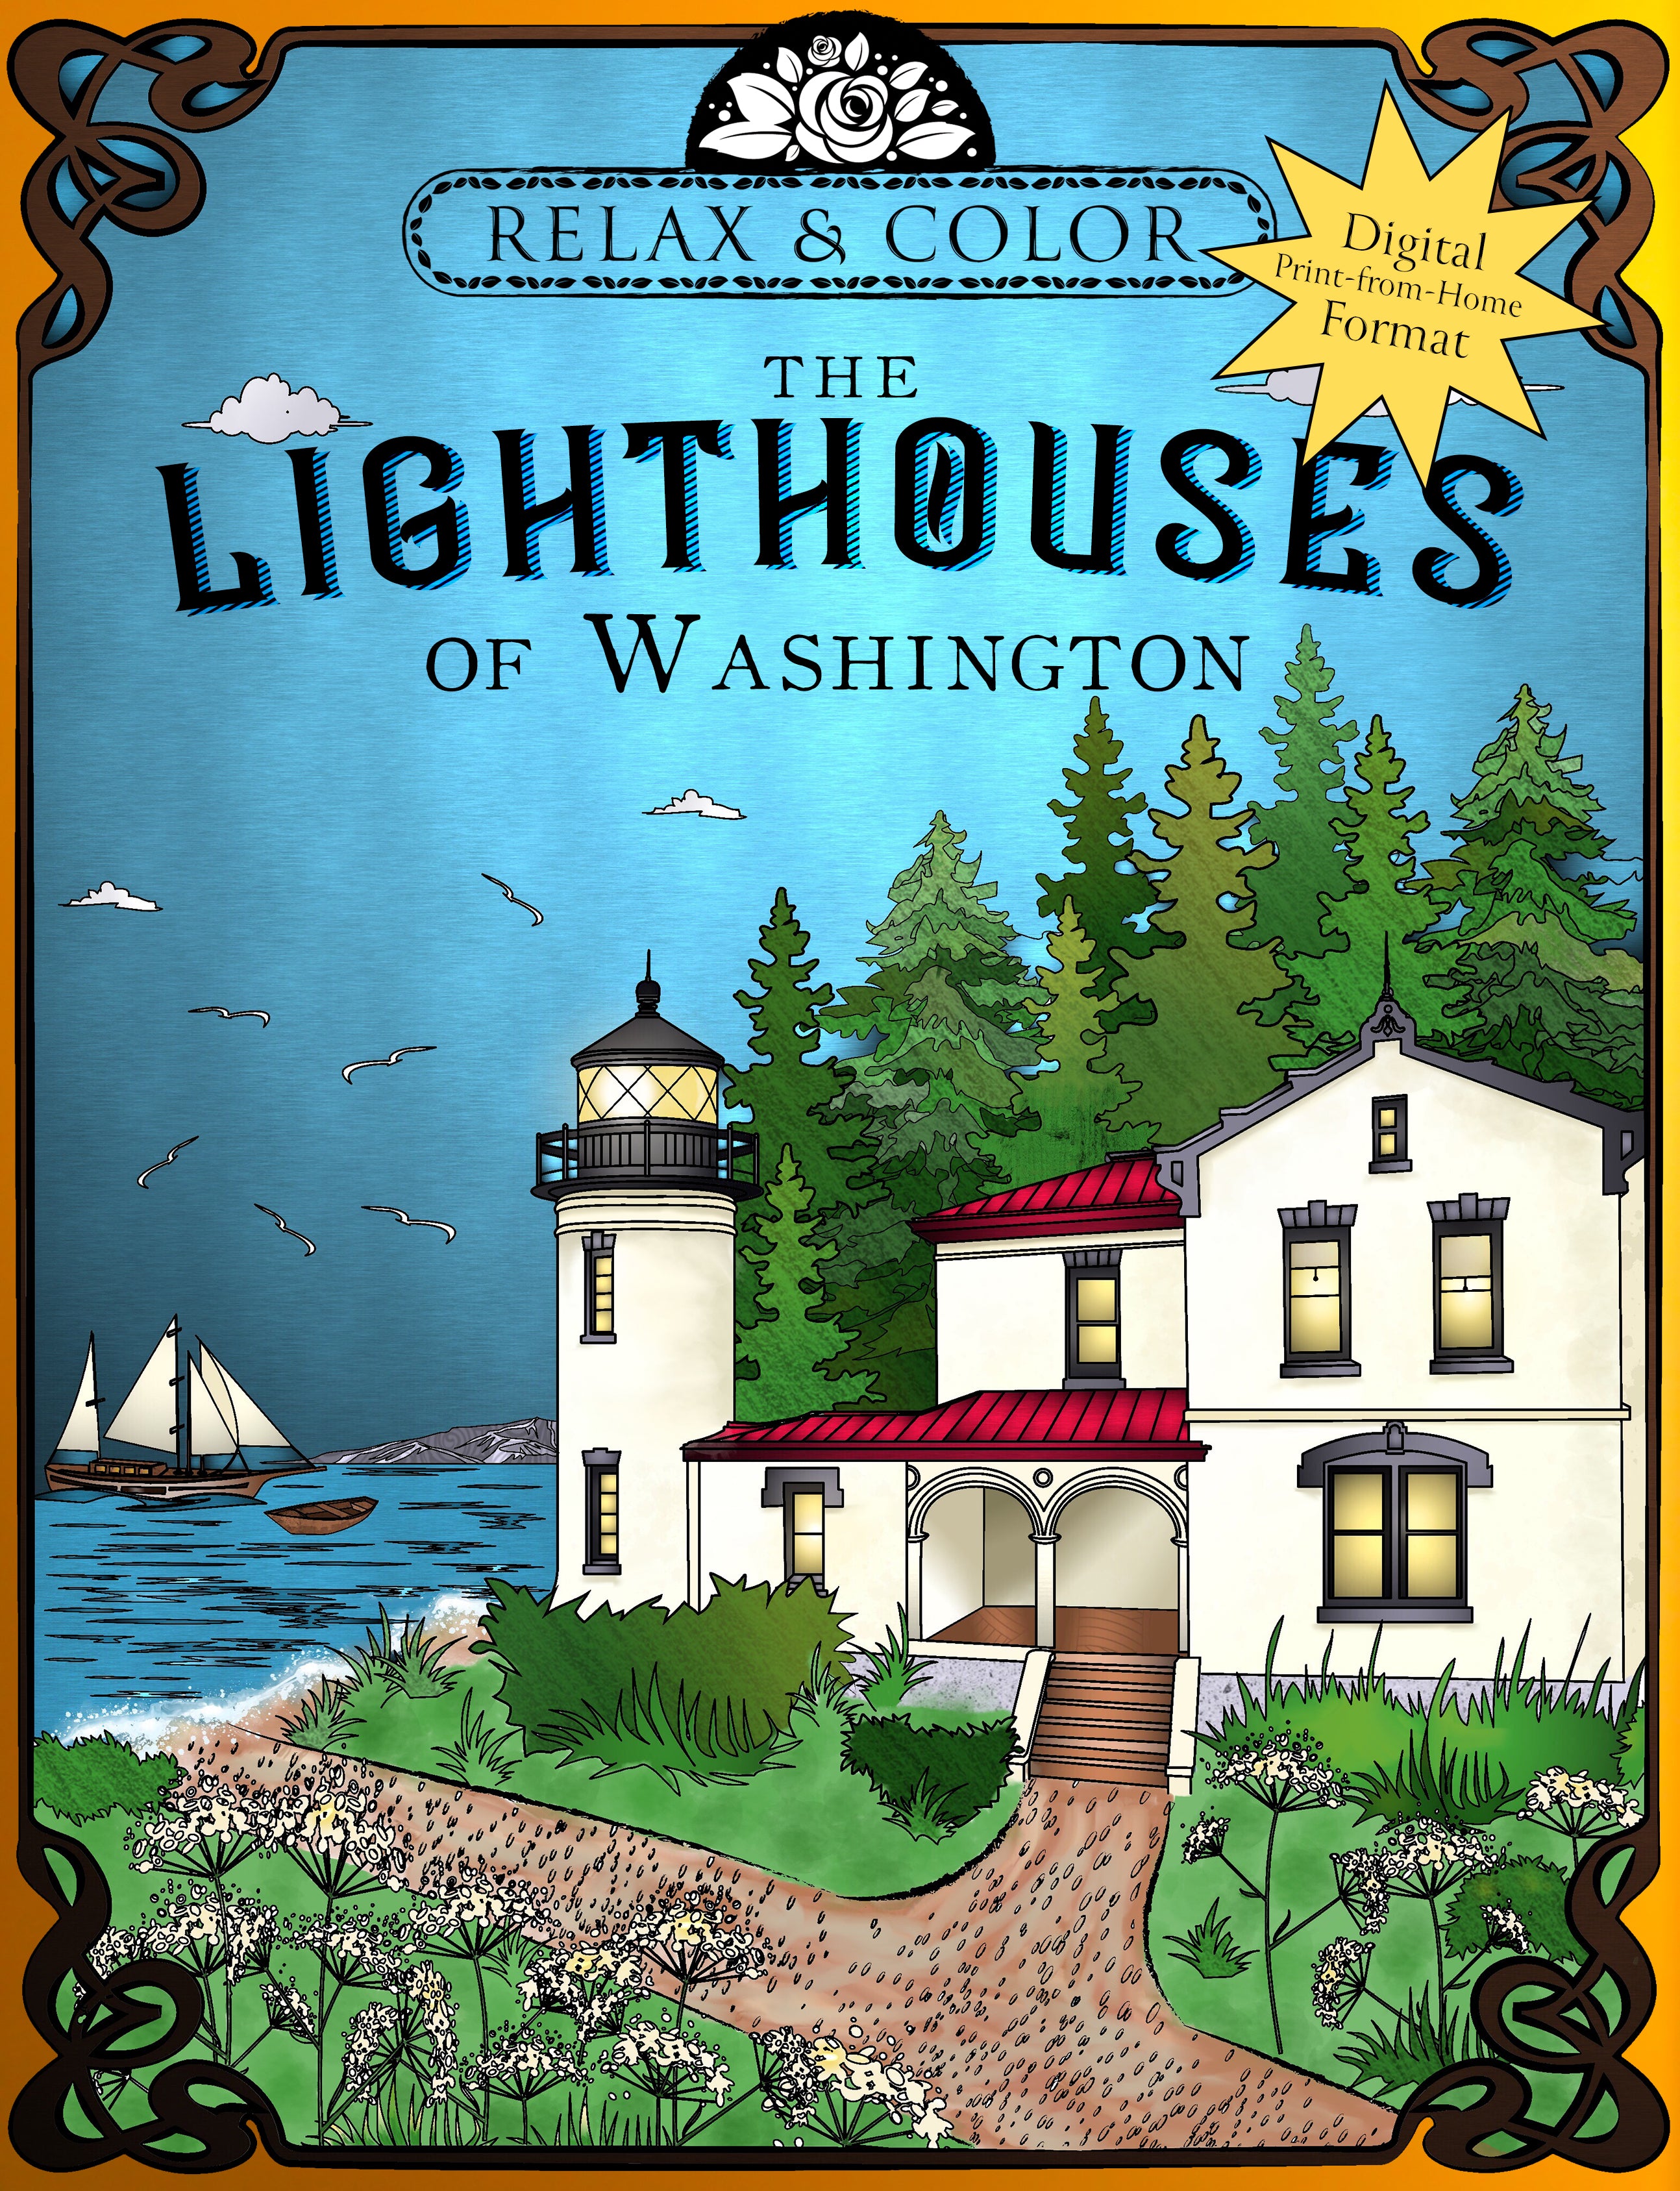 Relax and Color The Lighthouses of Washington (Digital Print-from-Home Format)